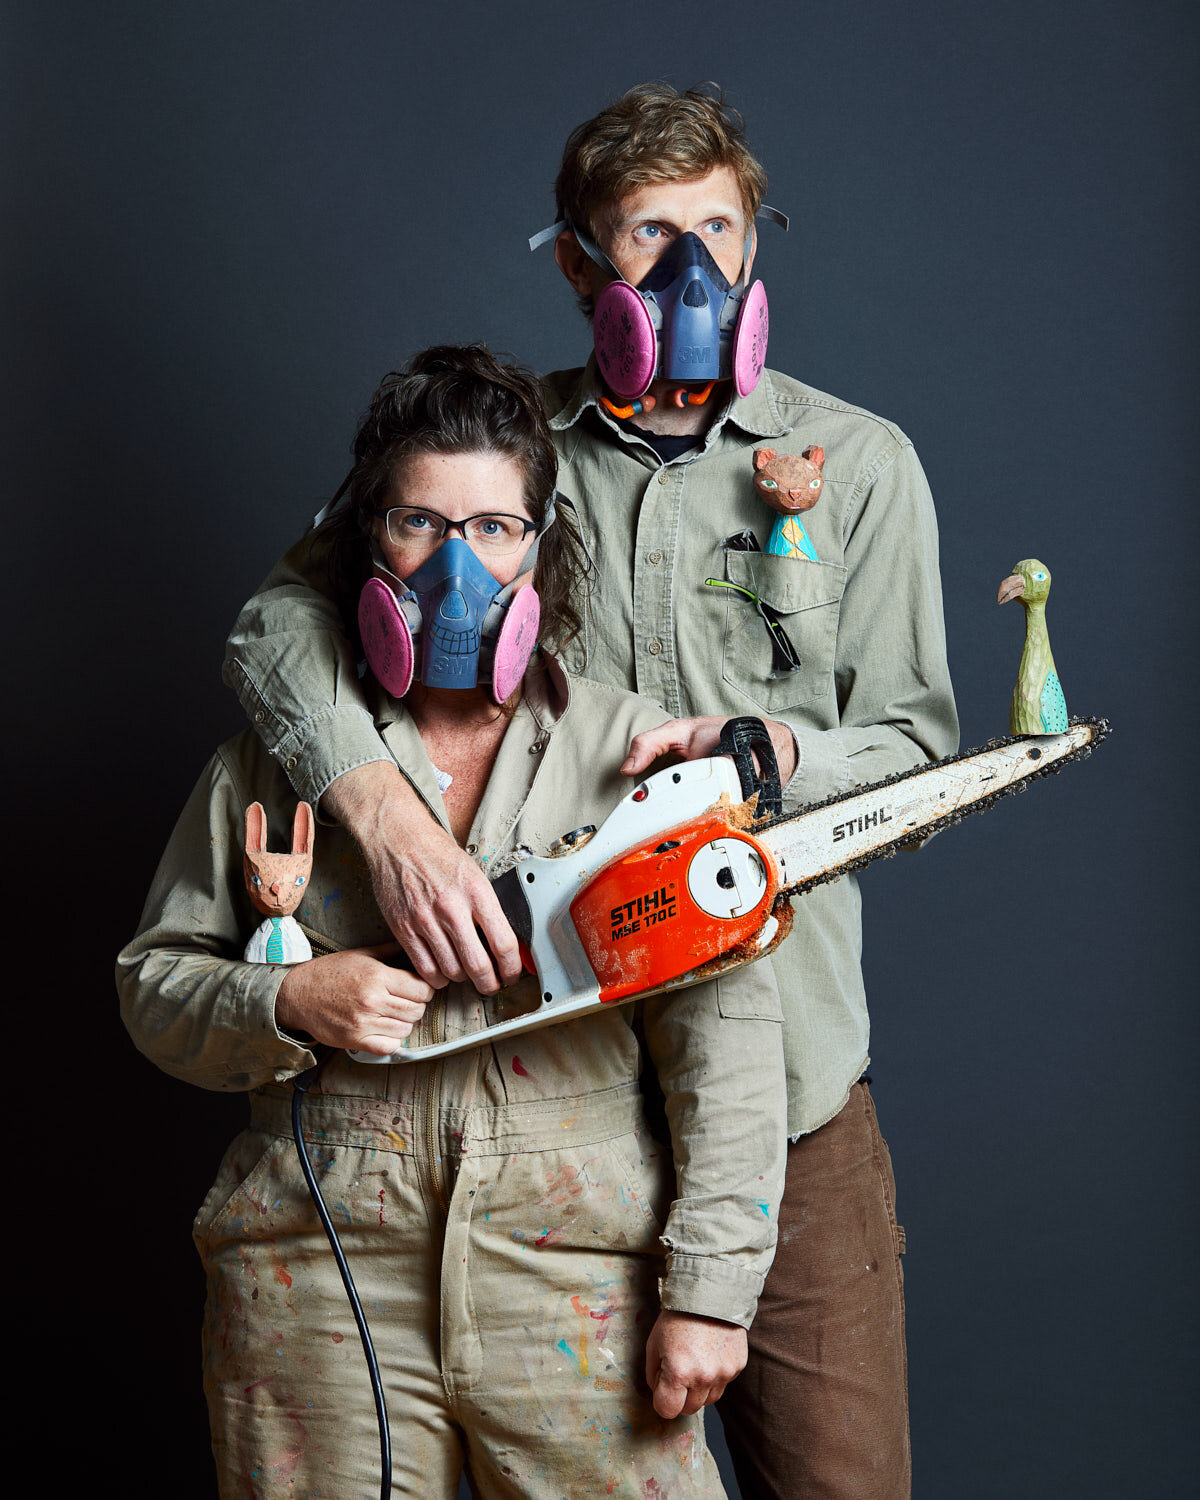 creative artist portrait of AAKSO duo with gas mask and chainsaw and their wooden sculptures